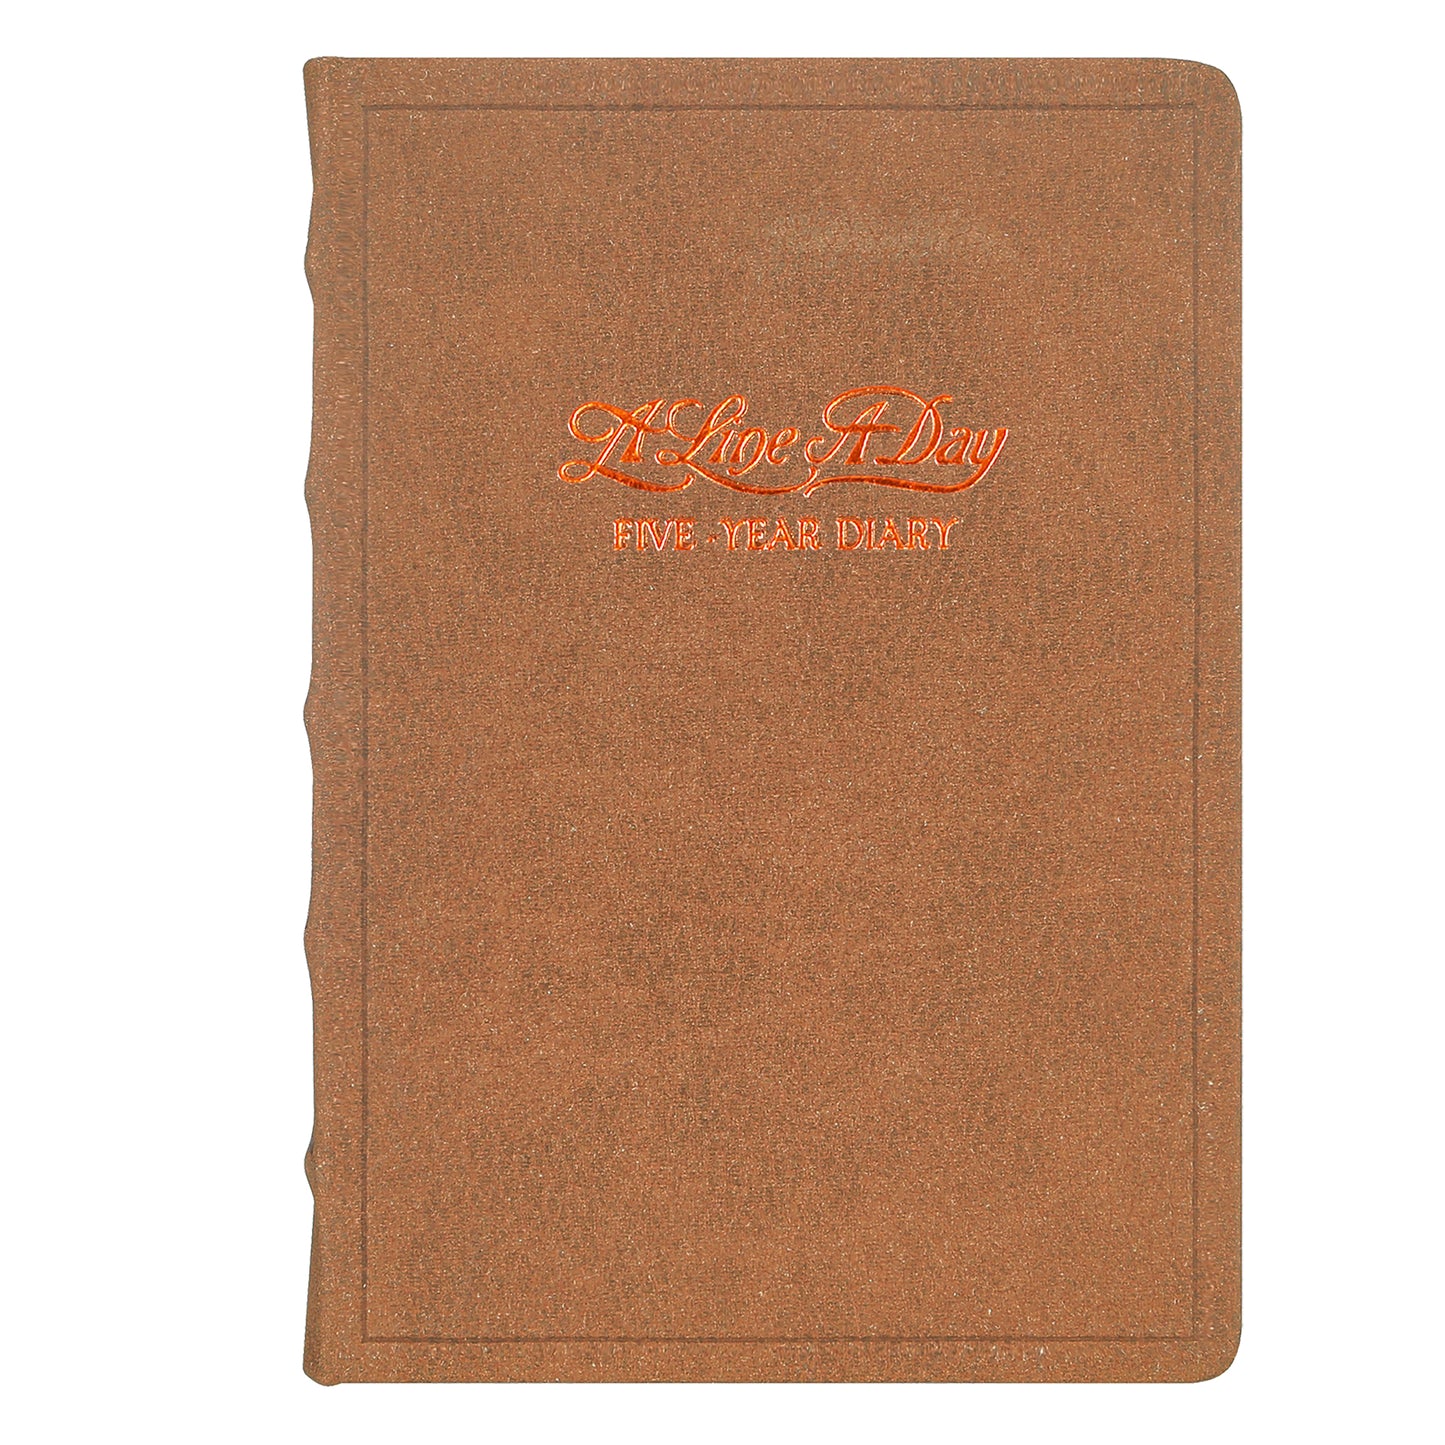 A Line a Day - 5 Year Recycled Leather Diary, Vintage Looking for Girls, Women and Men, 4.64x6.6" 394p. (Brown)